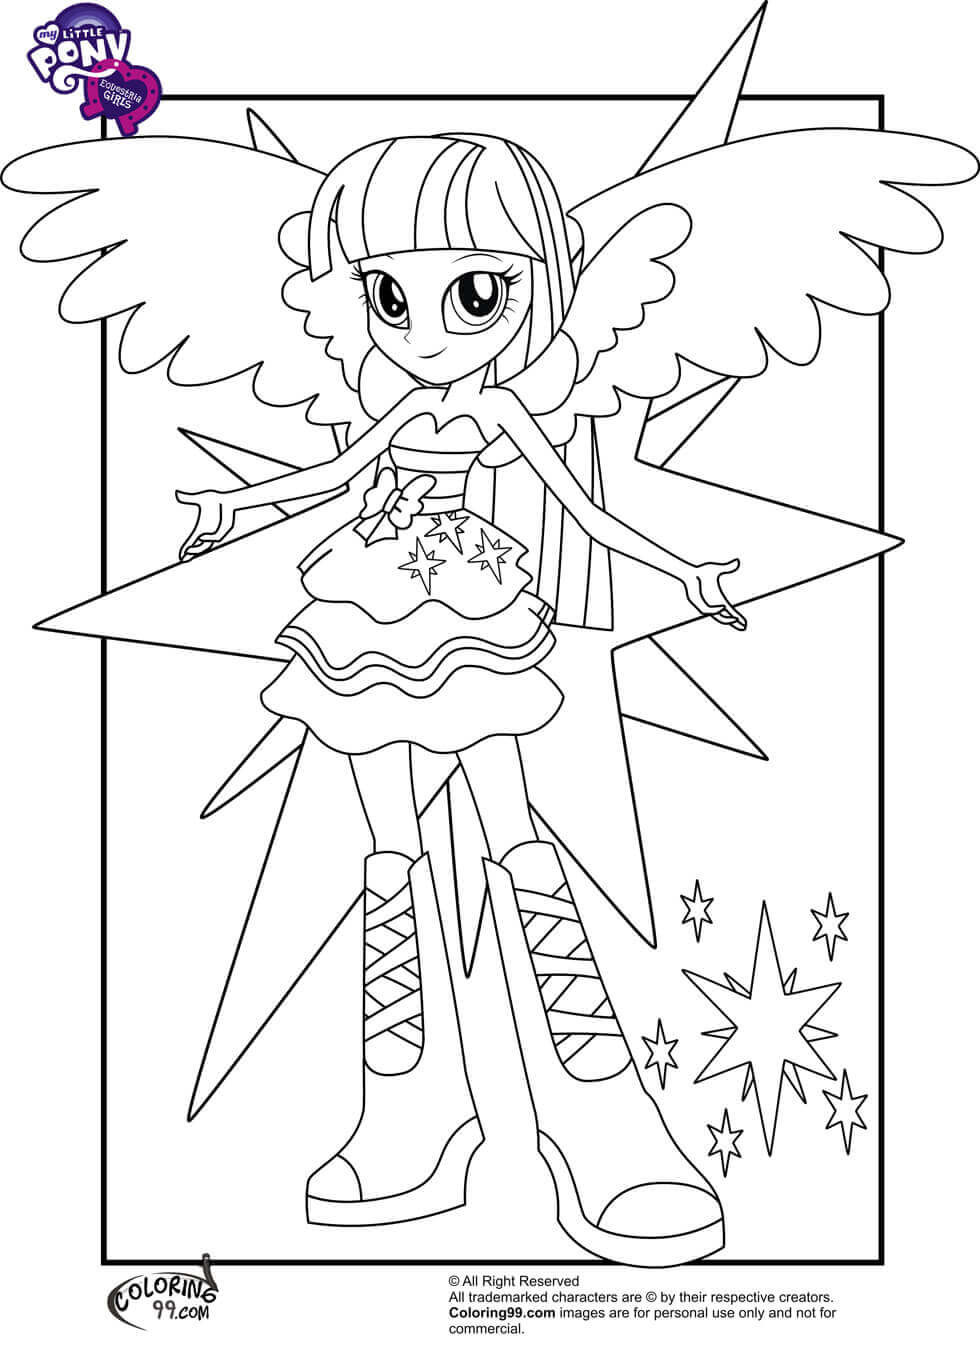 Equestria Girls Printable Coloring Pages
 15 Printable My Little Pony Equestria Girls Coloring Pages